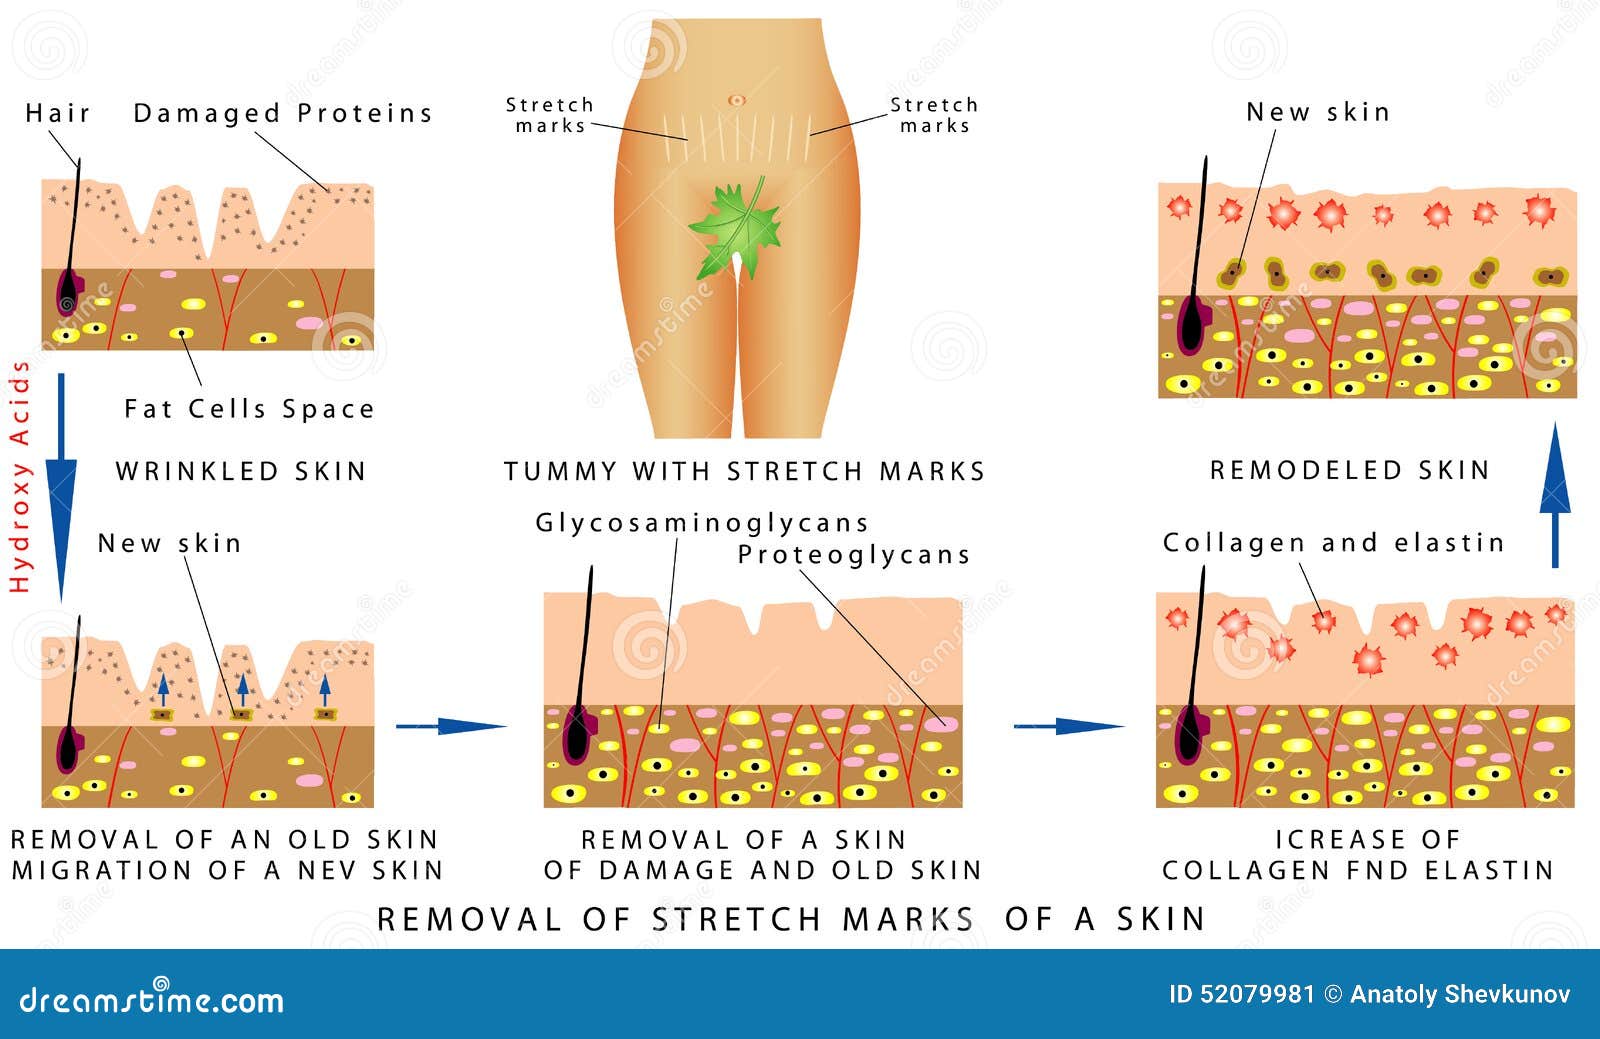 Stretch Marks Of A Skin Stock Vector - Image: 52079981